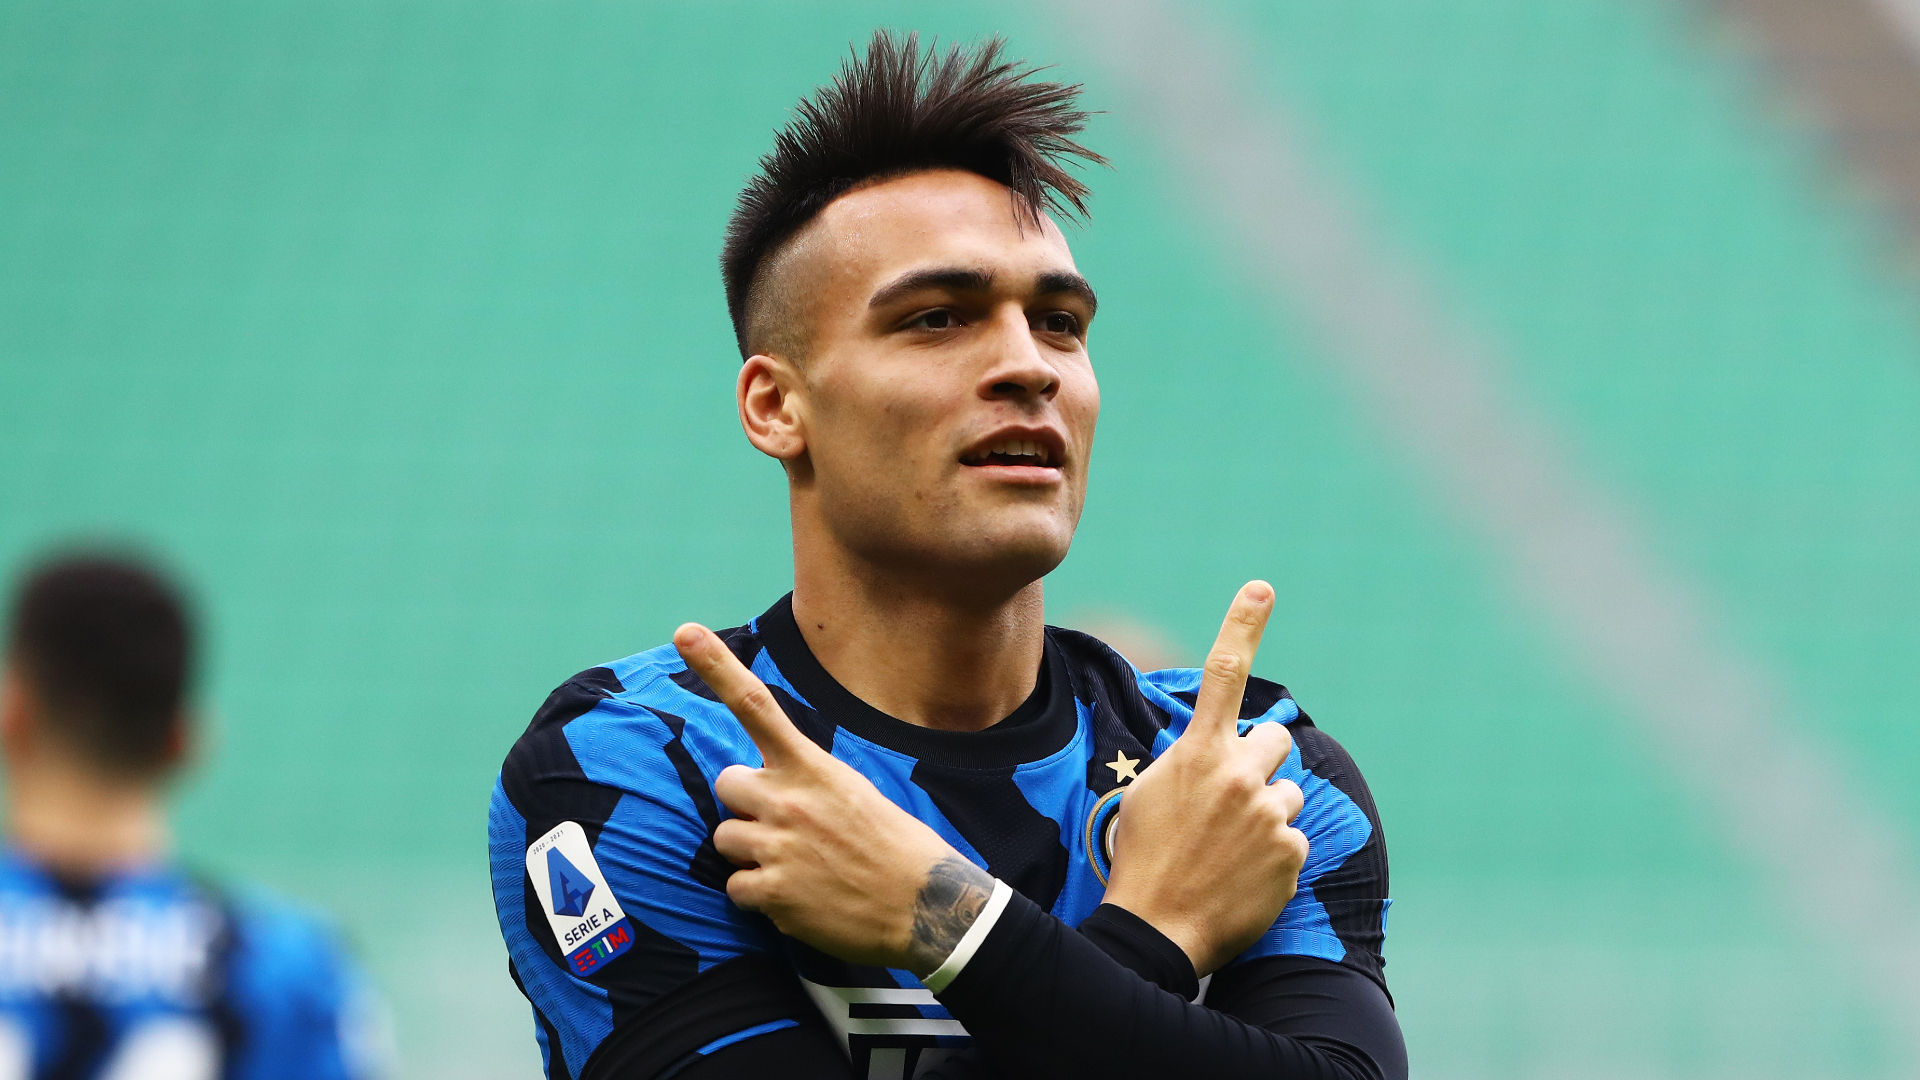 Tottenham target Lautaro rejected big offers in order to stay at Inter, Moratta confirms